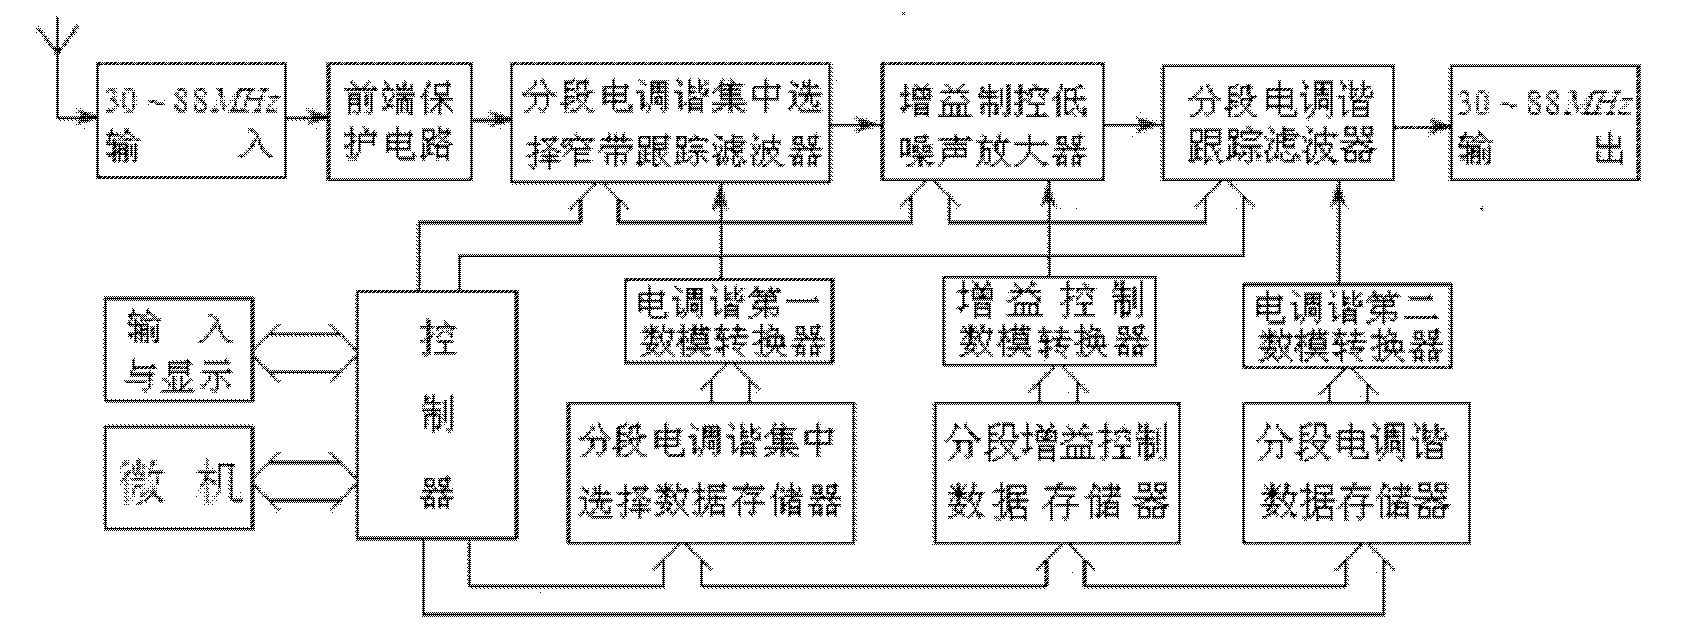 Agile ultrashort wave numerical control tracking tuning amplifying circuit with high anti-interference